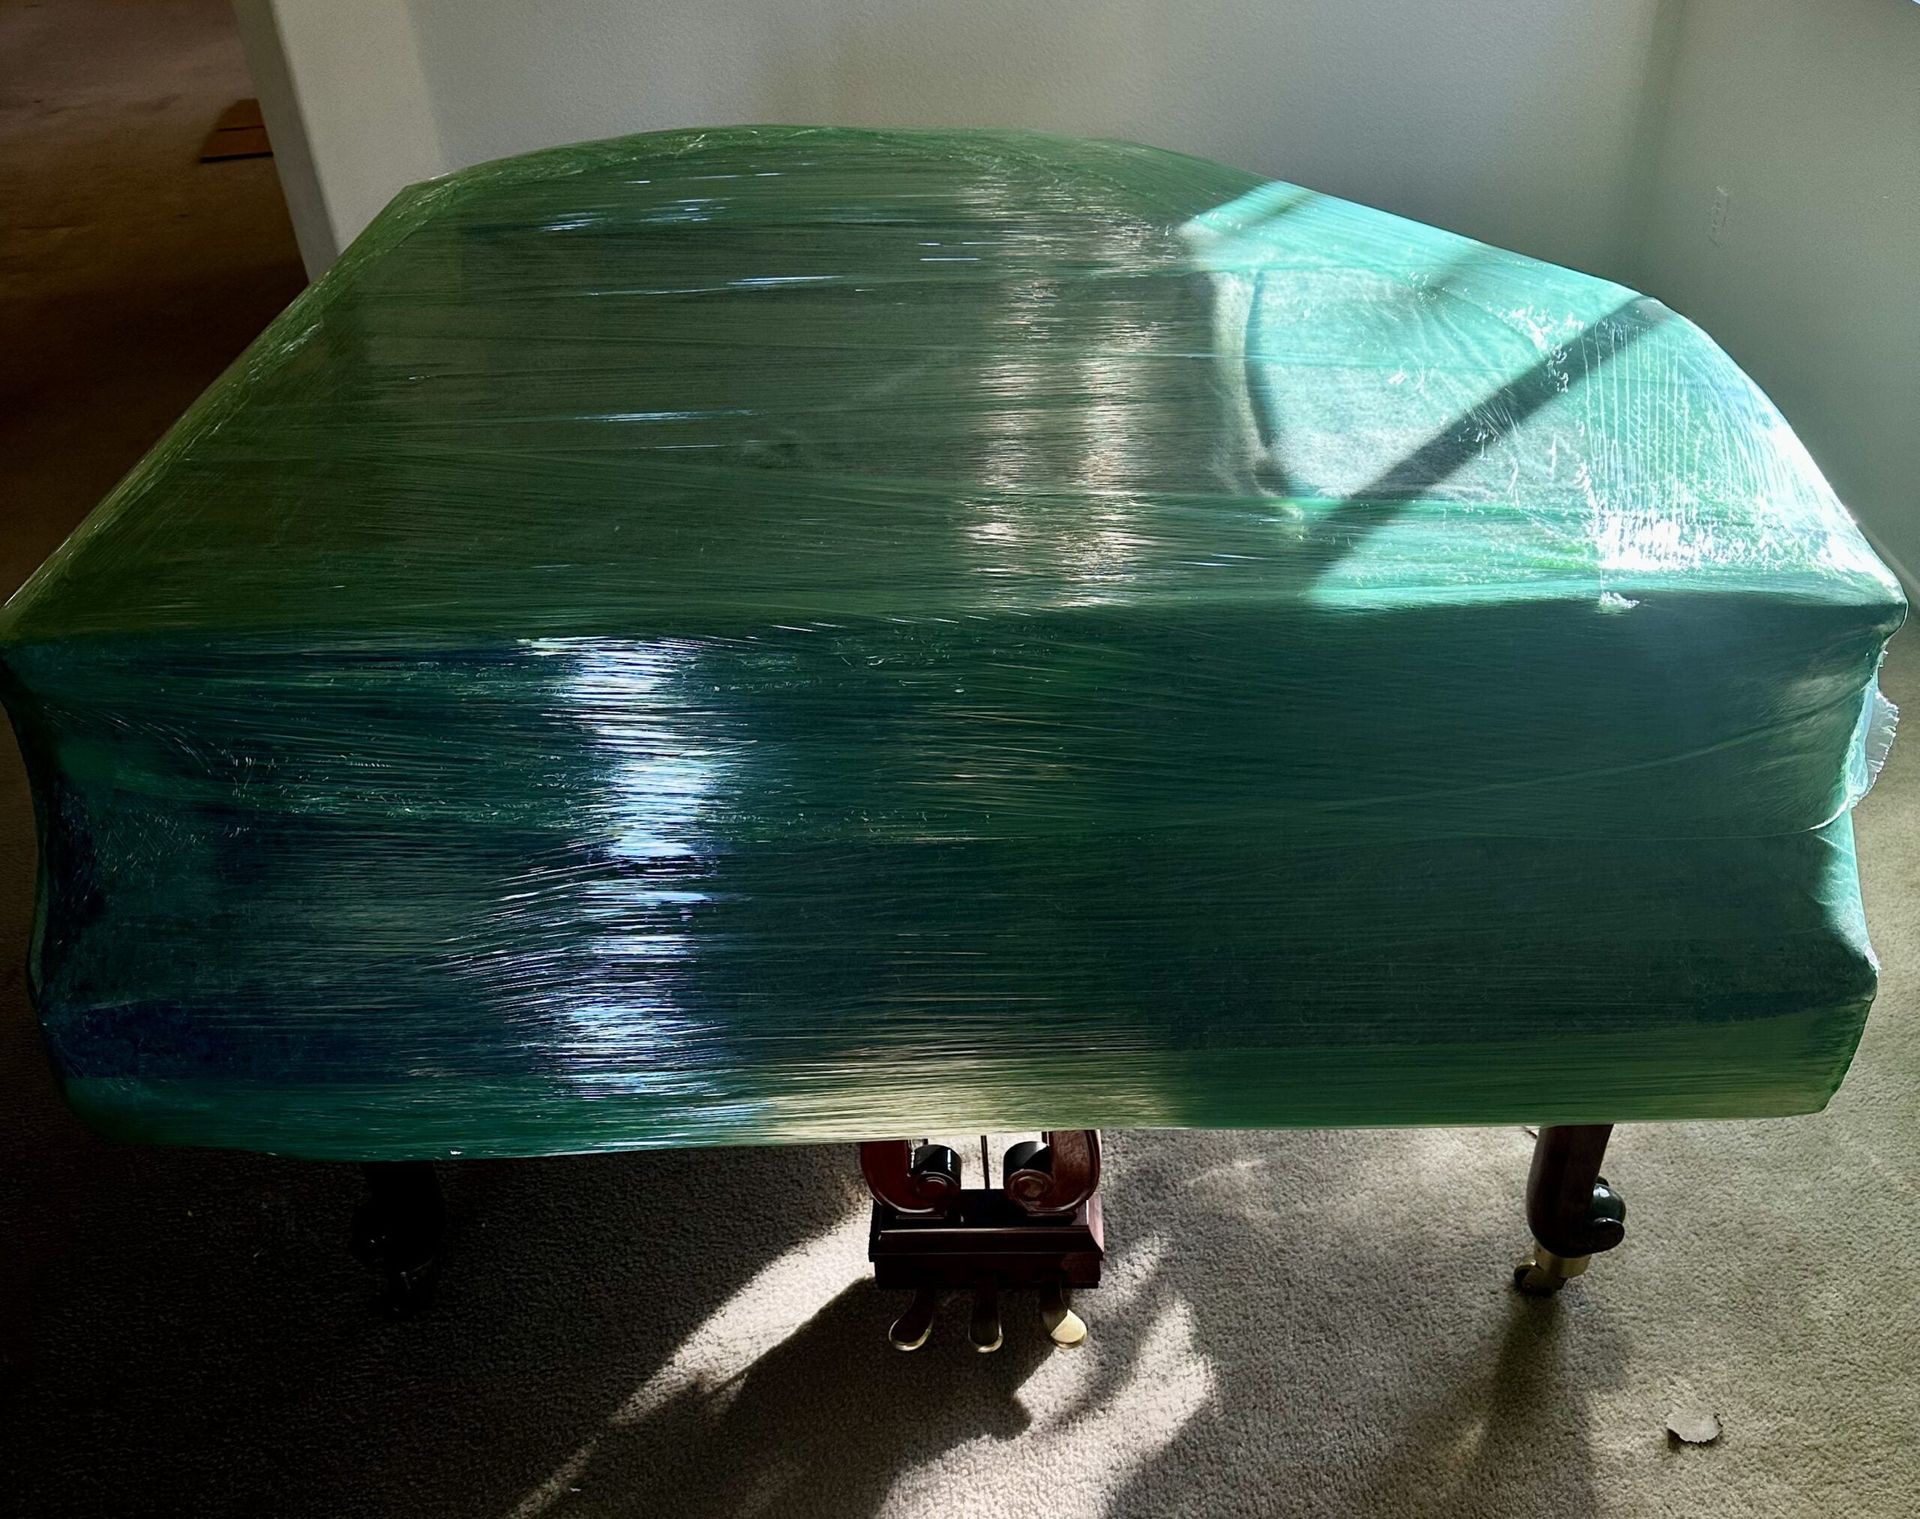 A green piano is wrapped in plastic and sitting on the floor